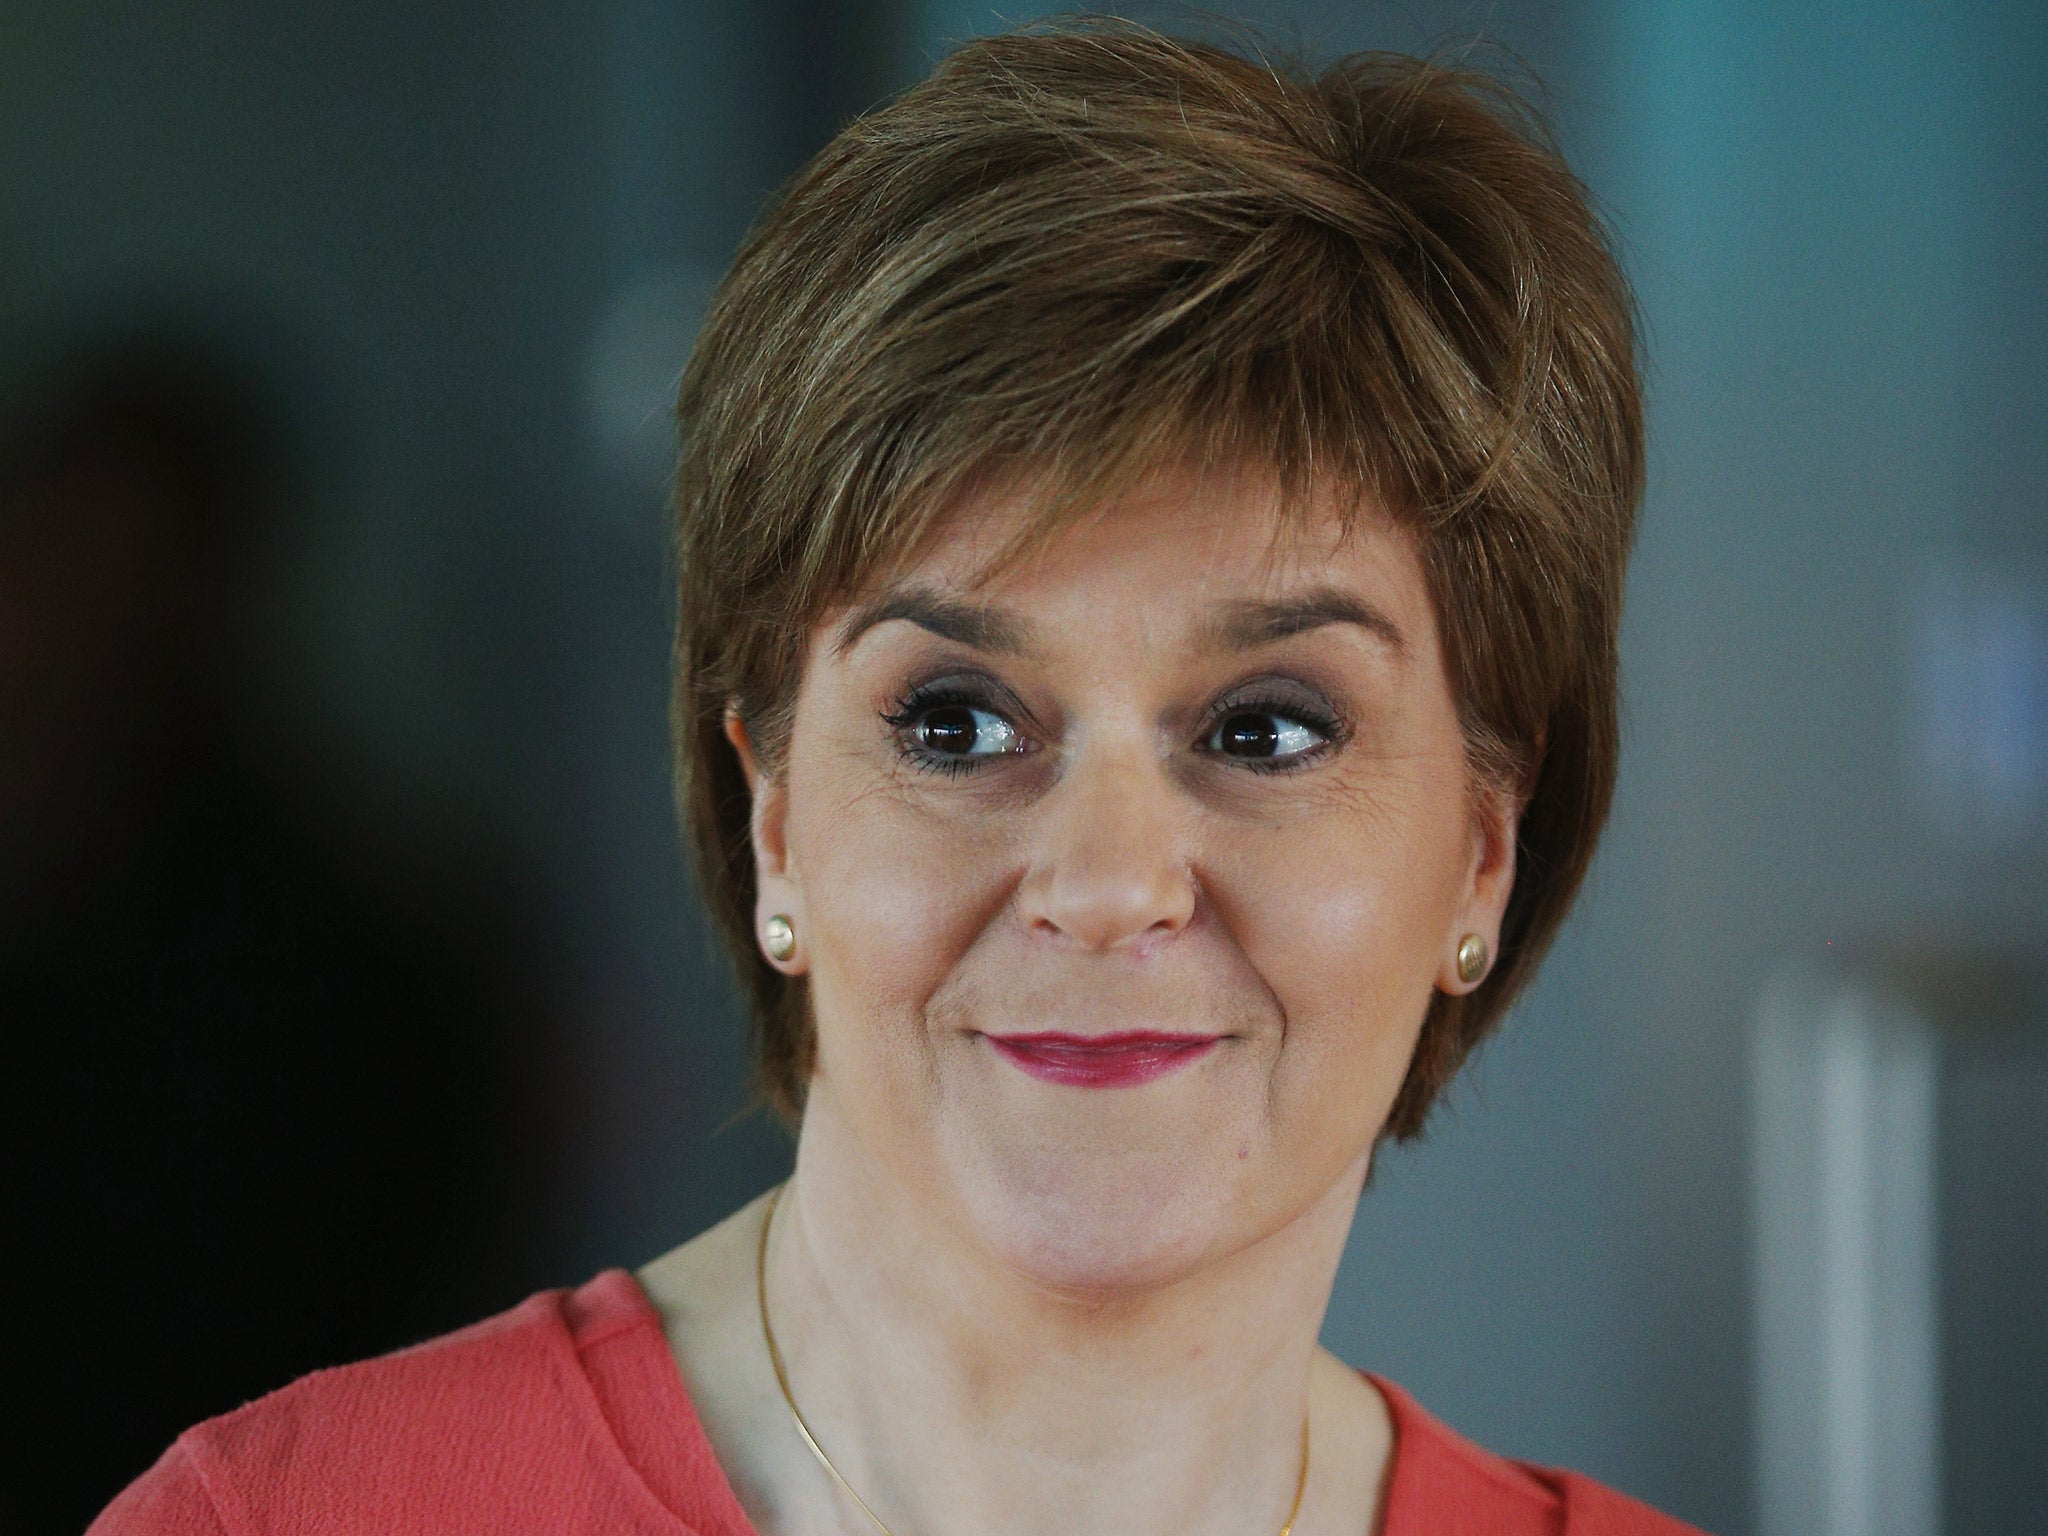 Ms Sturgeon omitted any reference to her discussion with the media tycoon